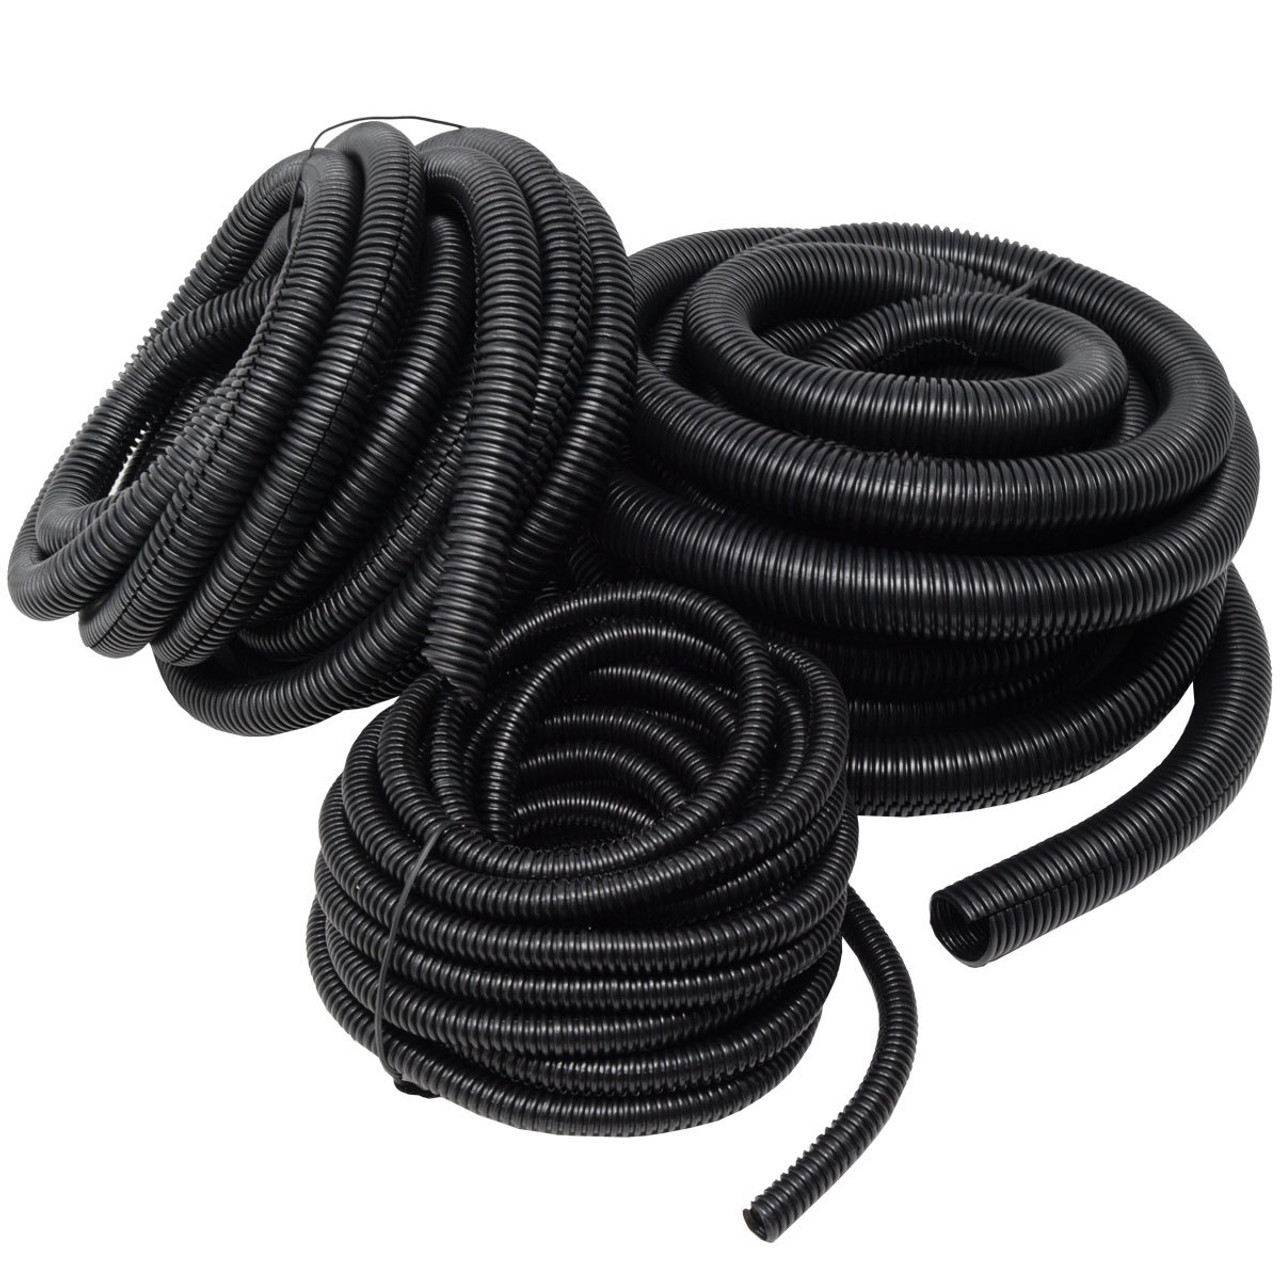 Split Sleeve Wire Loom Tubing Cables Harness Wrap Protector Cords Black Lot